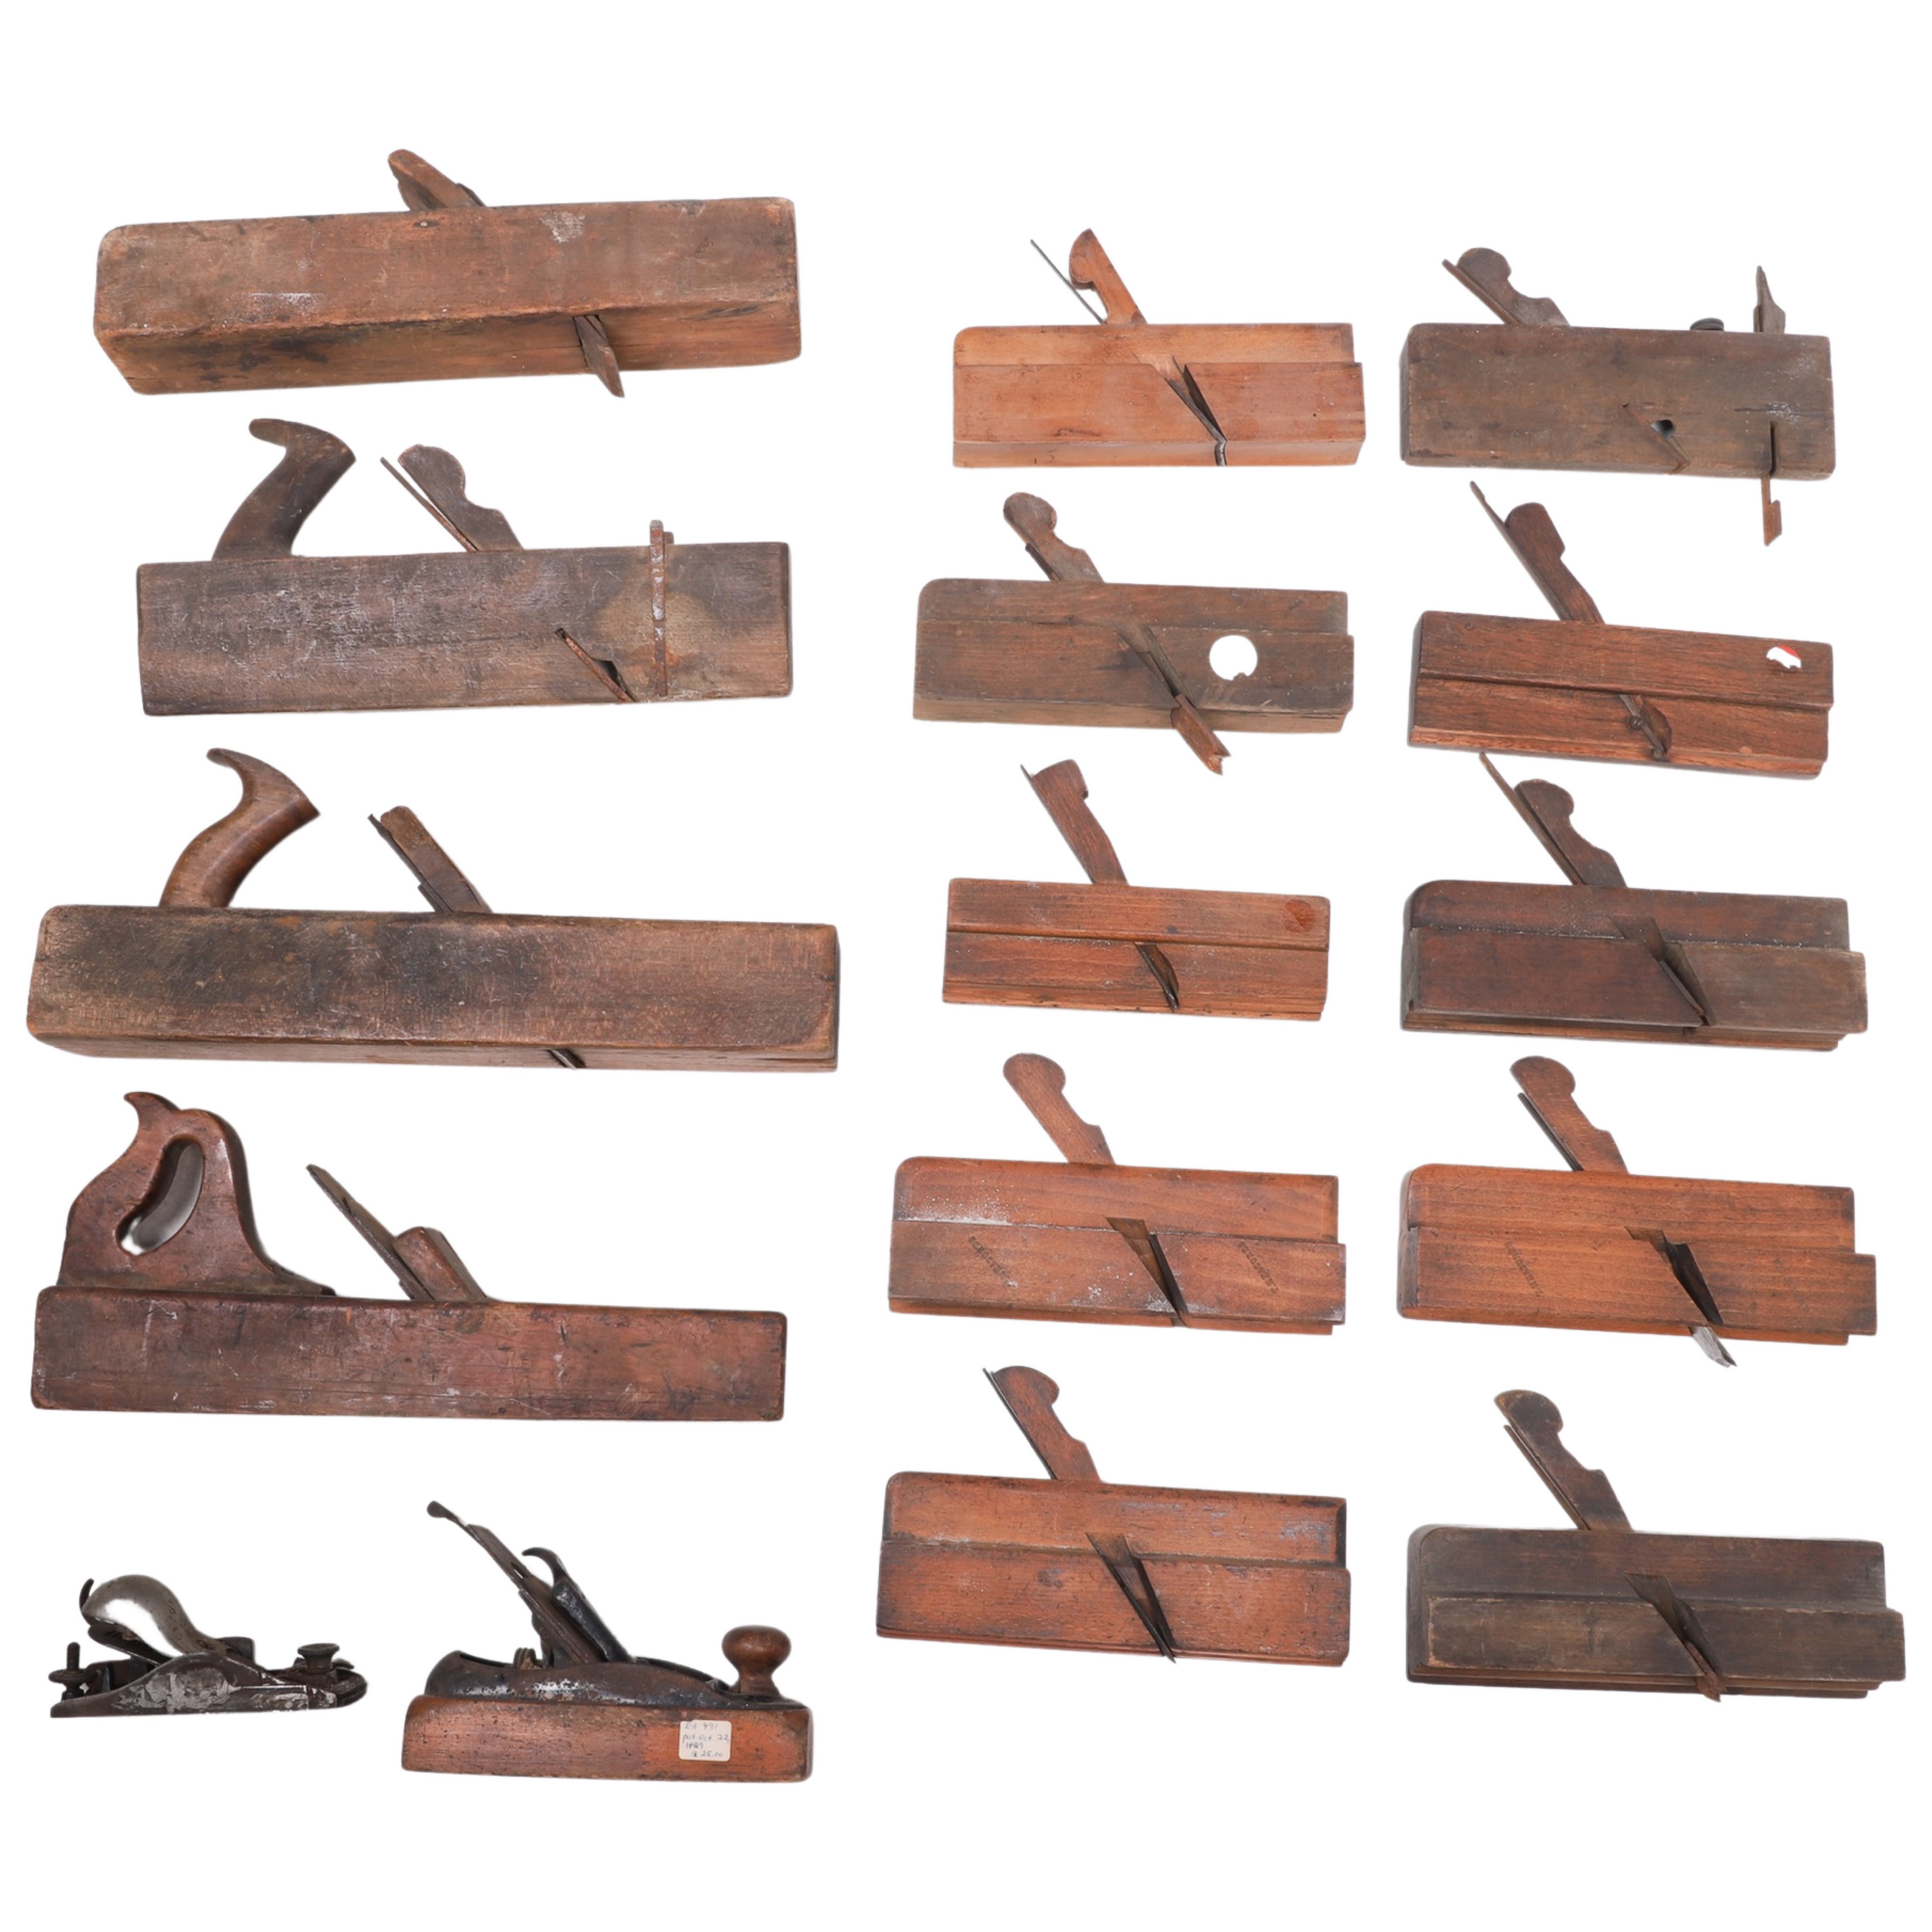  16 Antique wood hand planes including 30ffc0